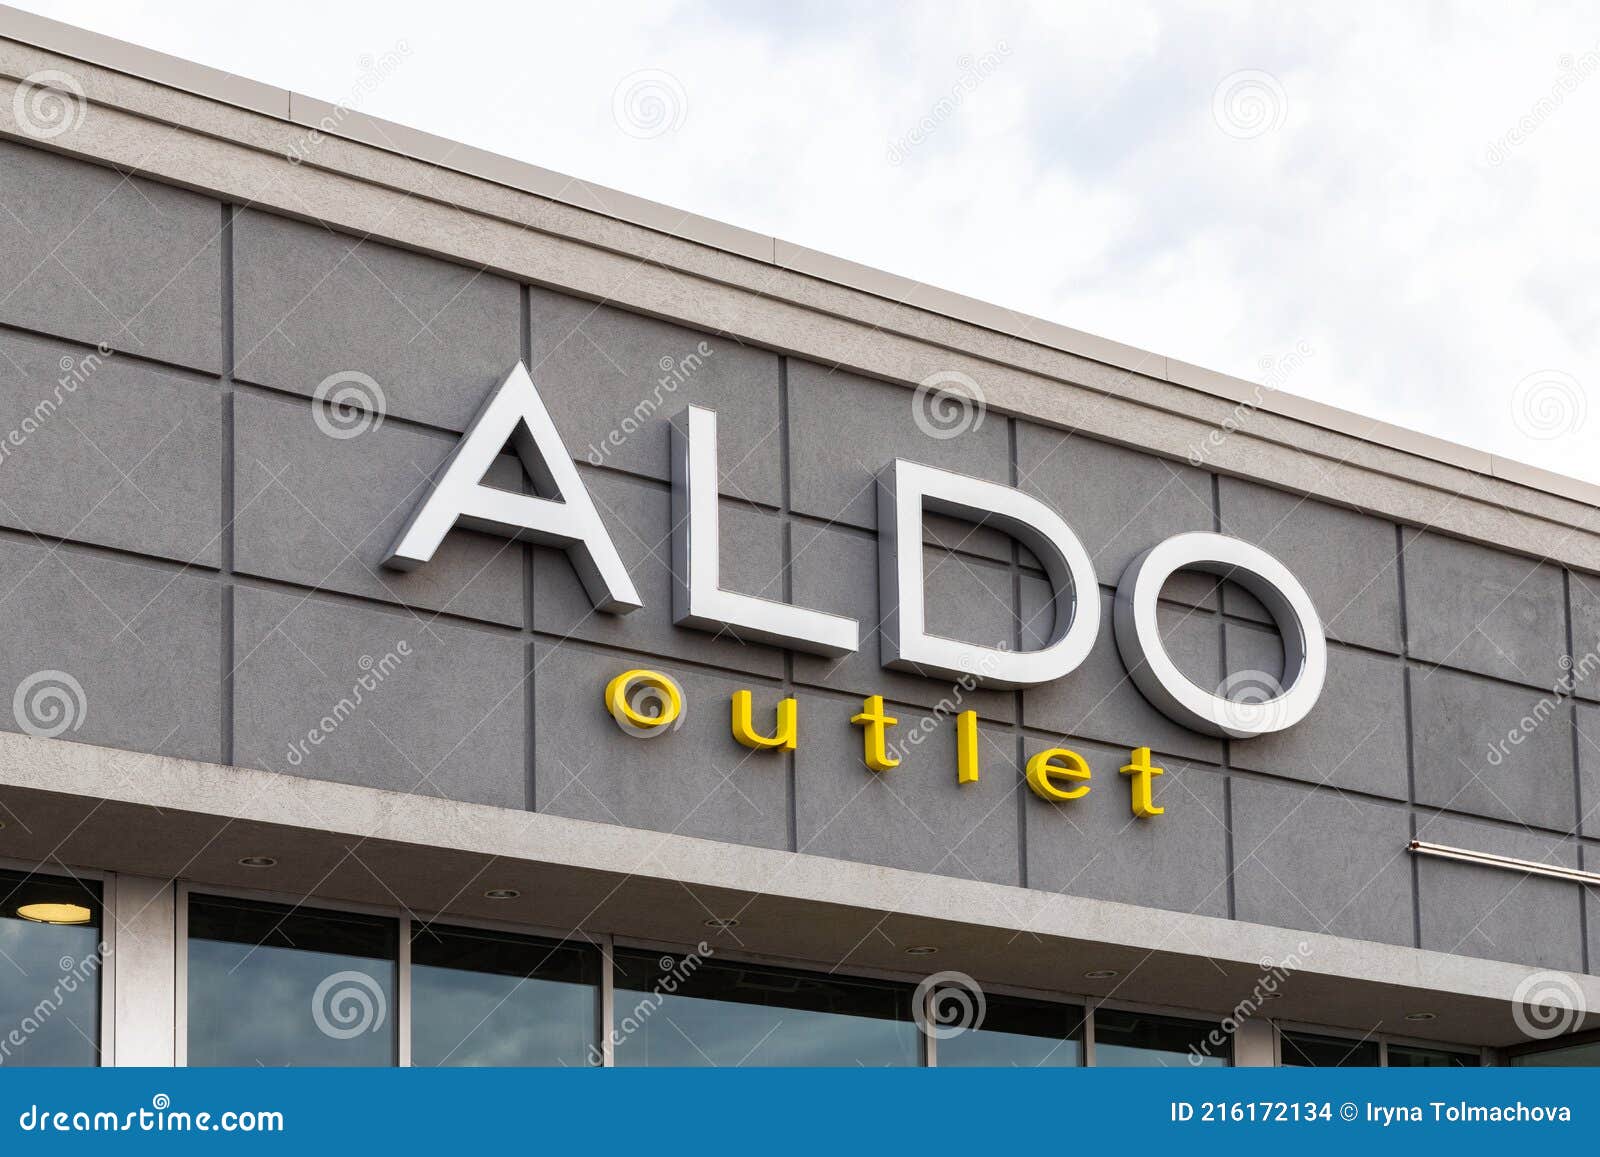 Aldo Shoe Store Outlet Canada Editorial Stock Image - of footwear, editorial: 216172134